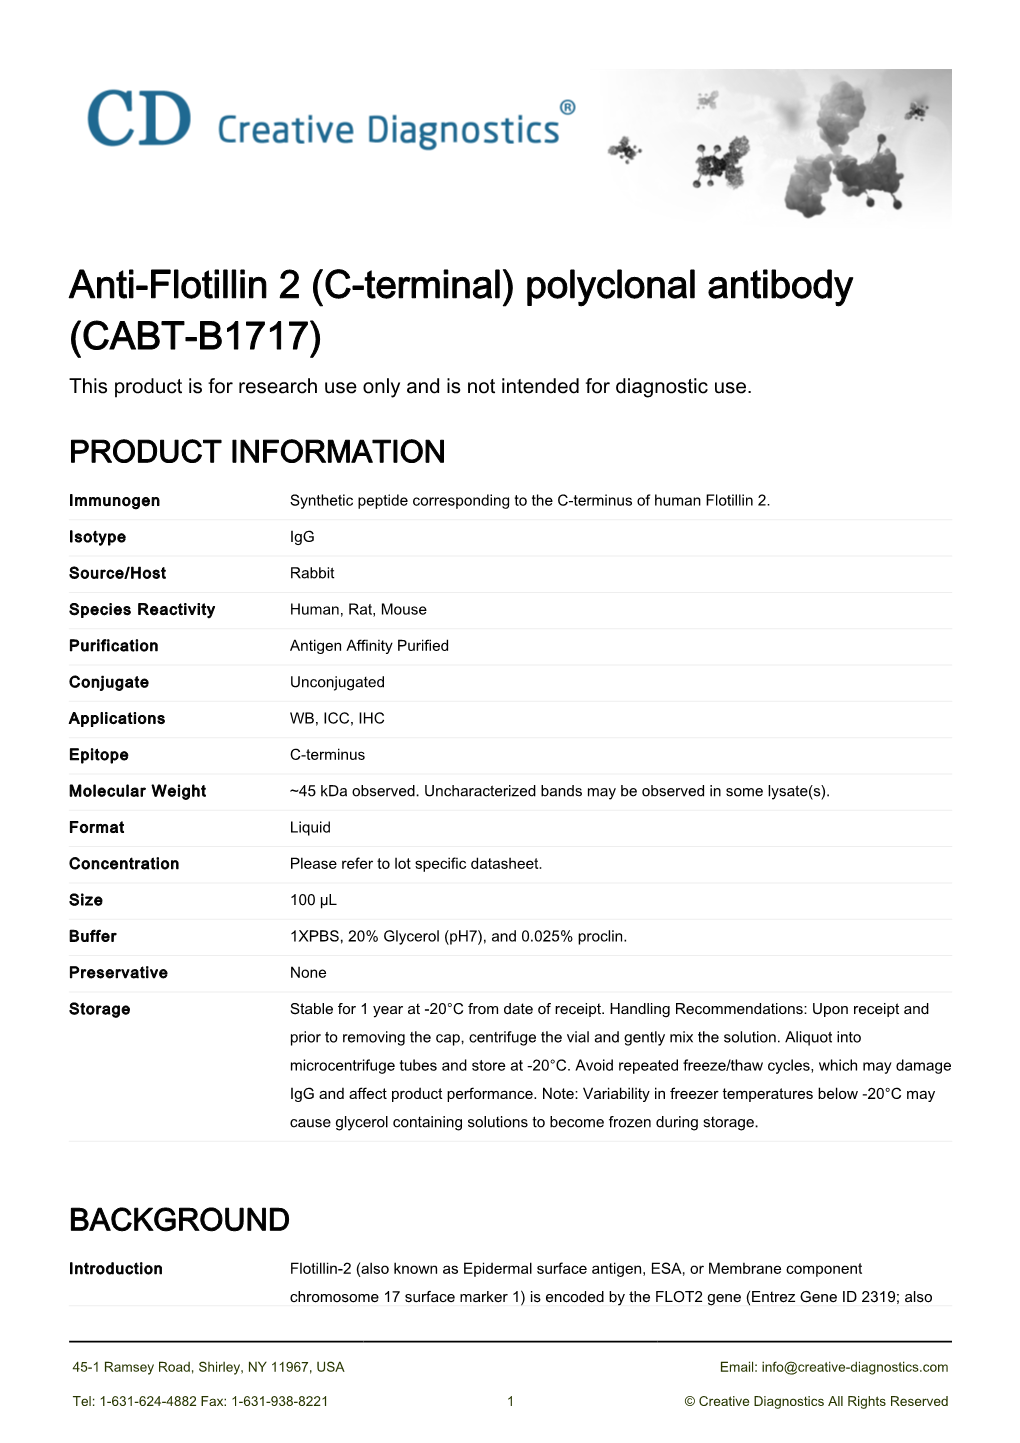 Anti-Flotillin 2 (C-Terminal) Polyclonal Antibody (CABT-B1717) This Product Is for Research Use Only and Is Not Intended for Diagnostic Use